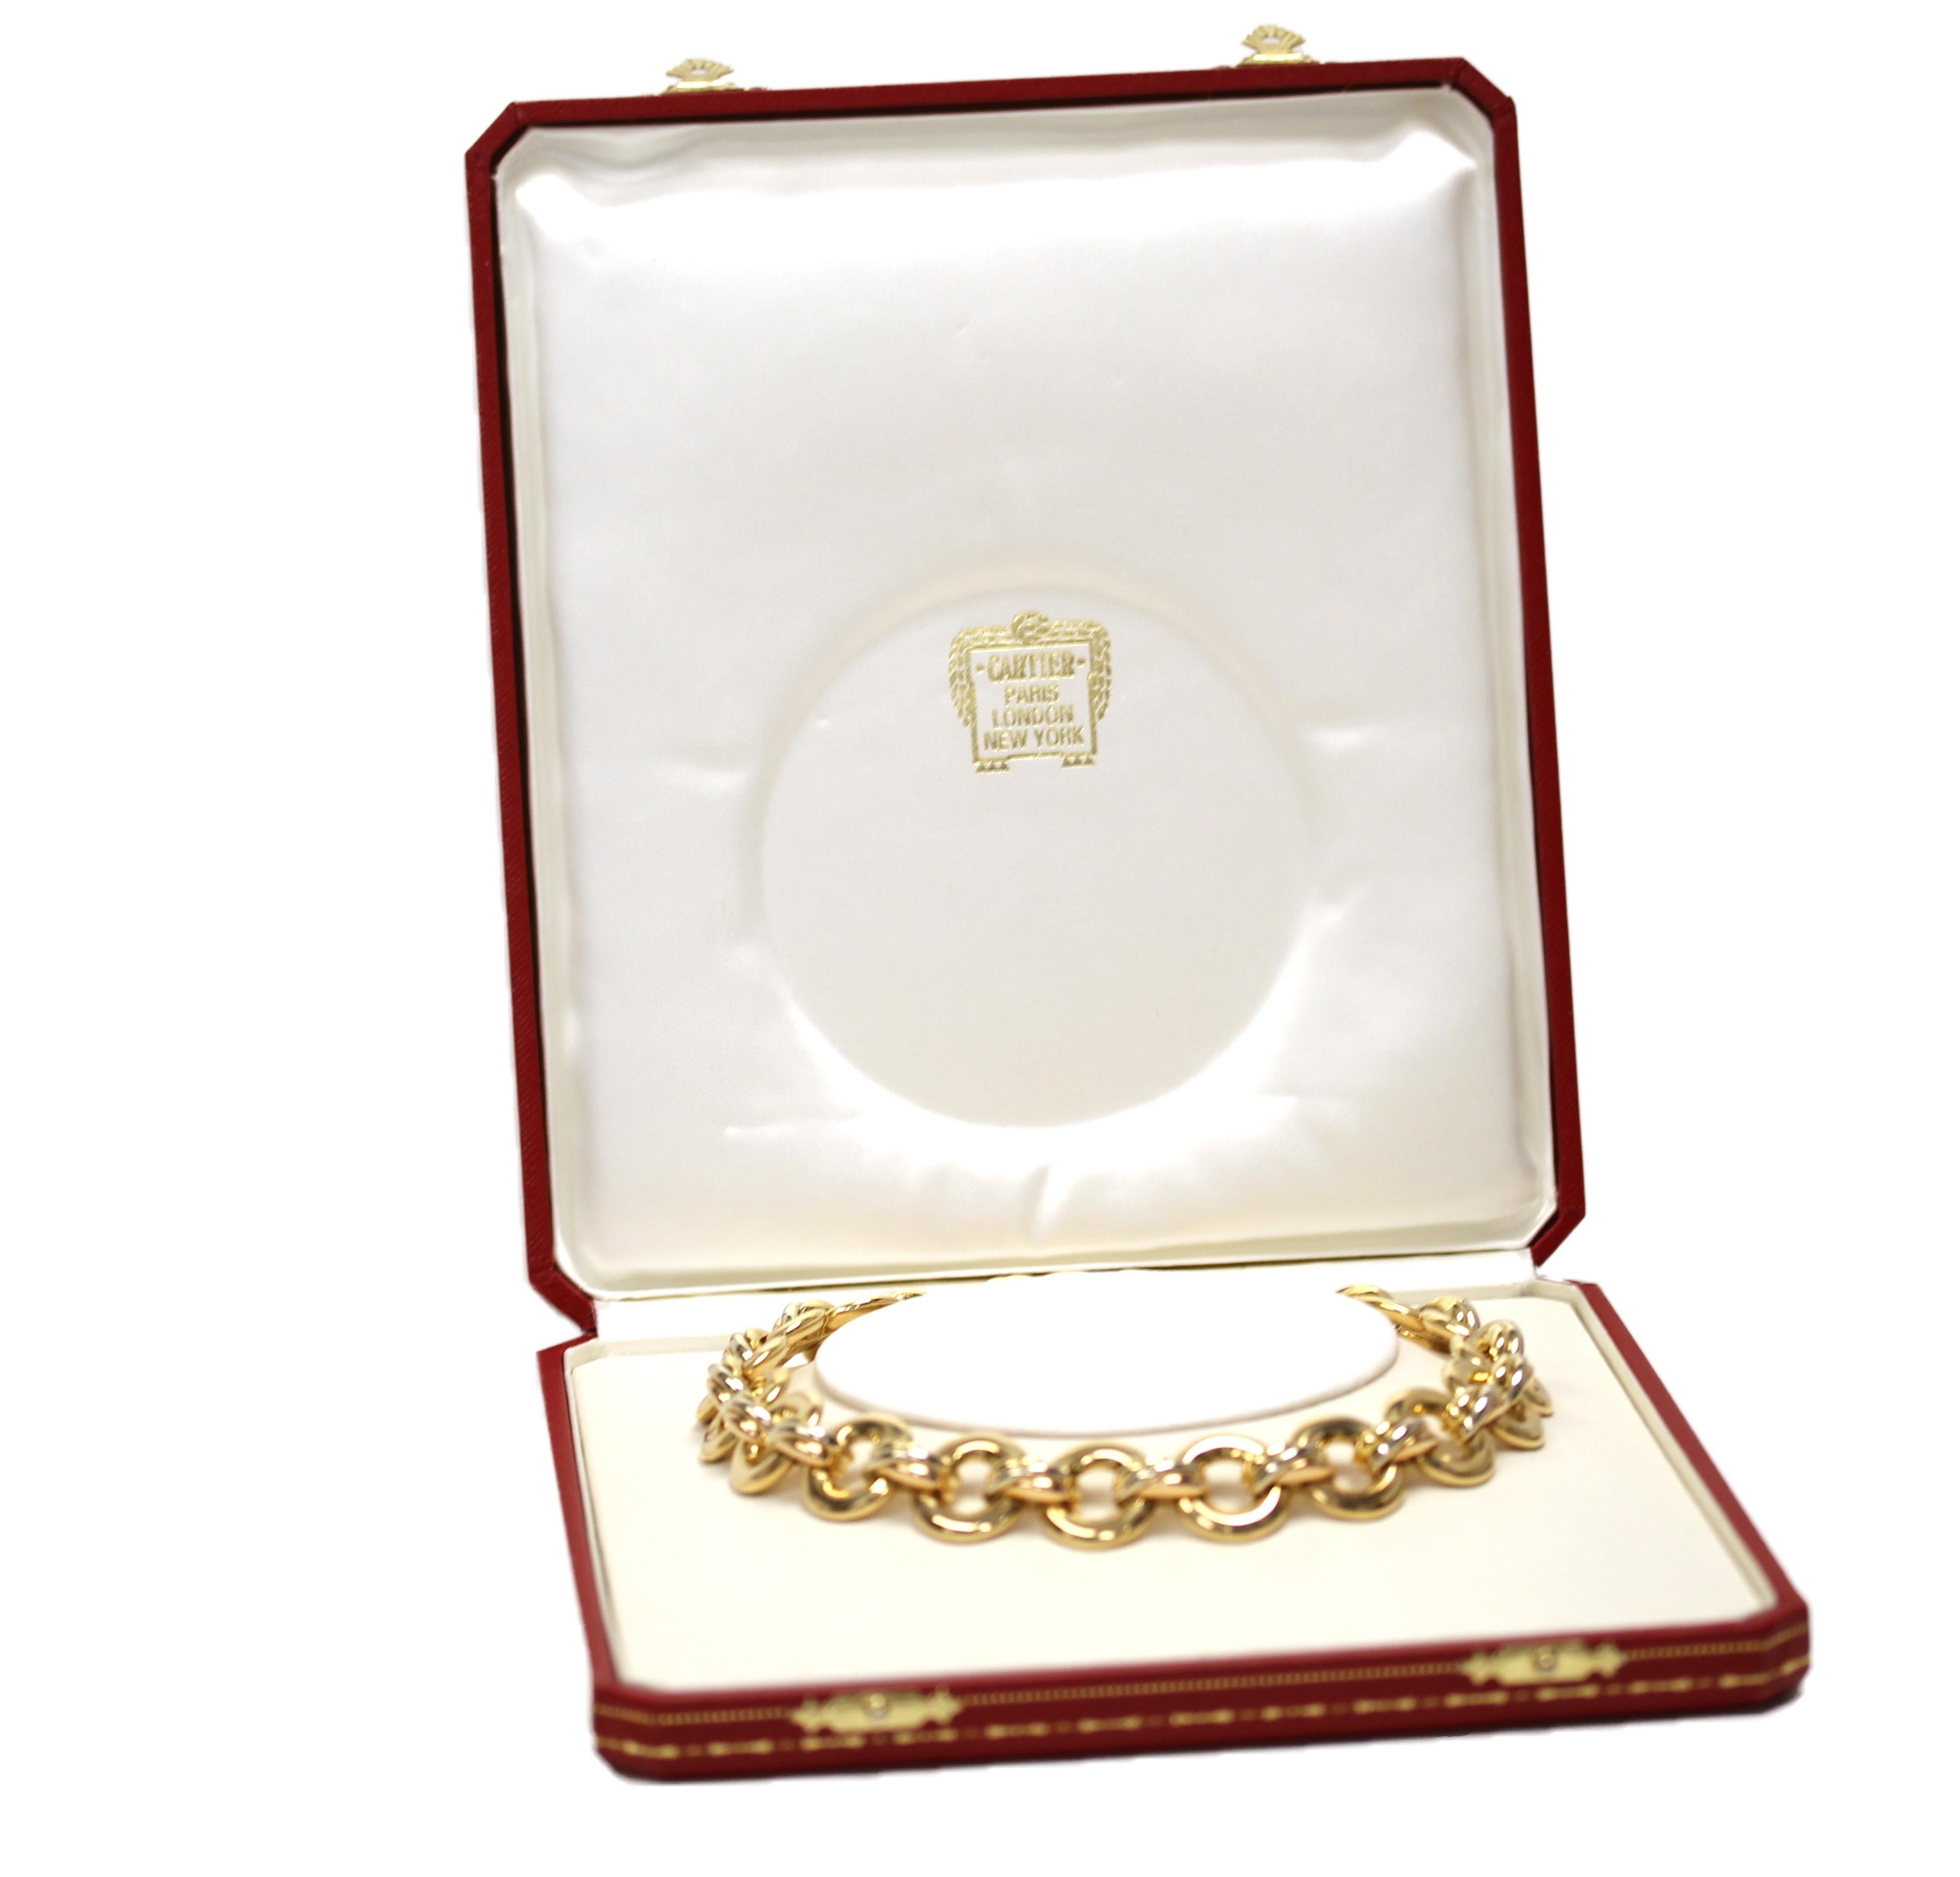 Cartier 18kt Gold Trinity Round Link Necklace  In Excellent Condition For Sale In Bethesda, MD